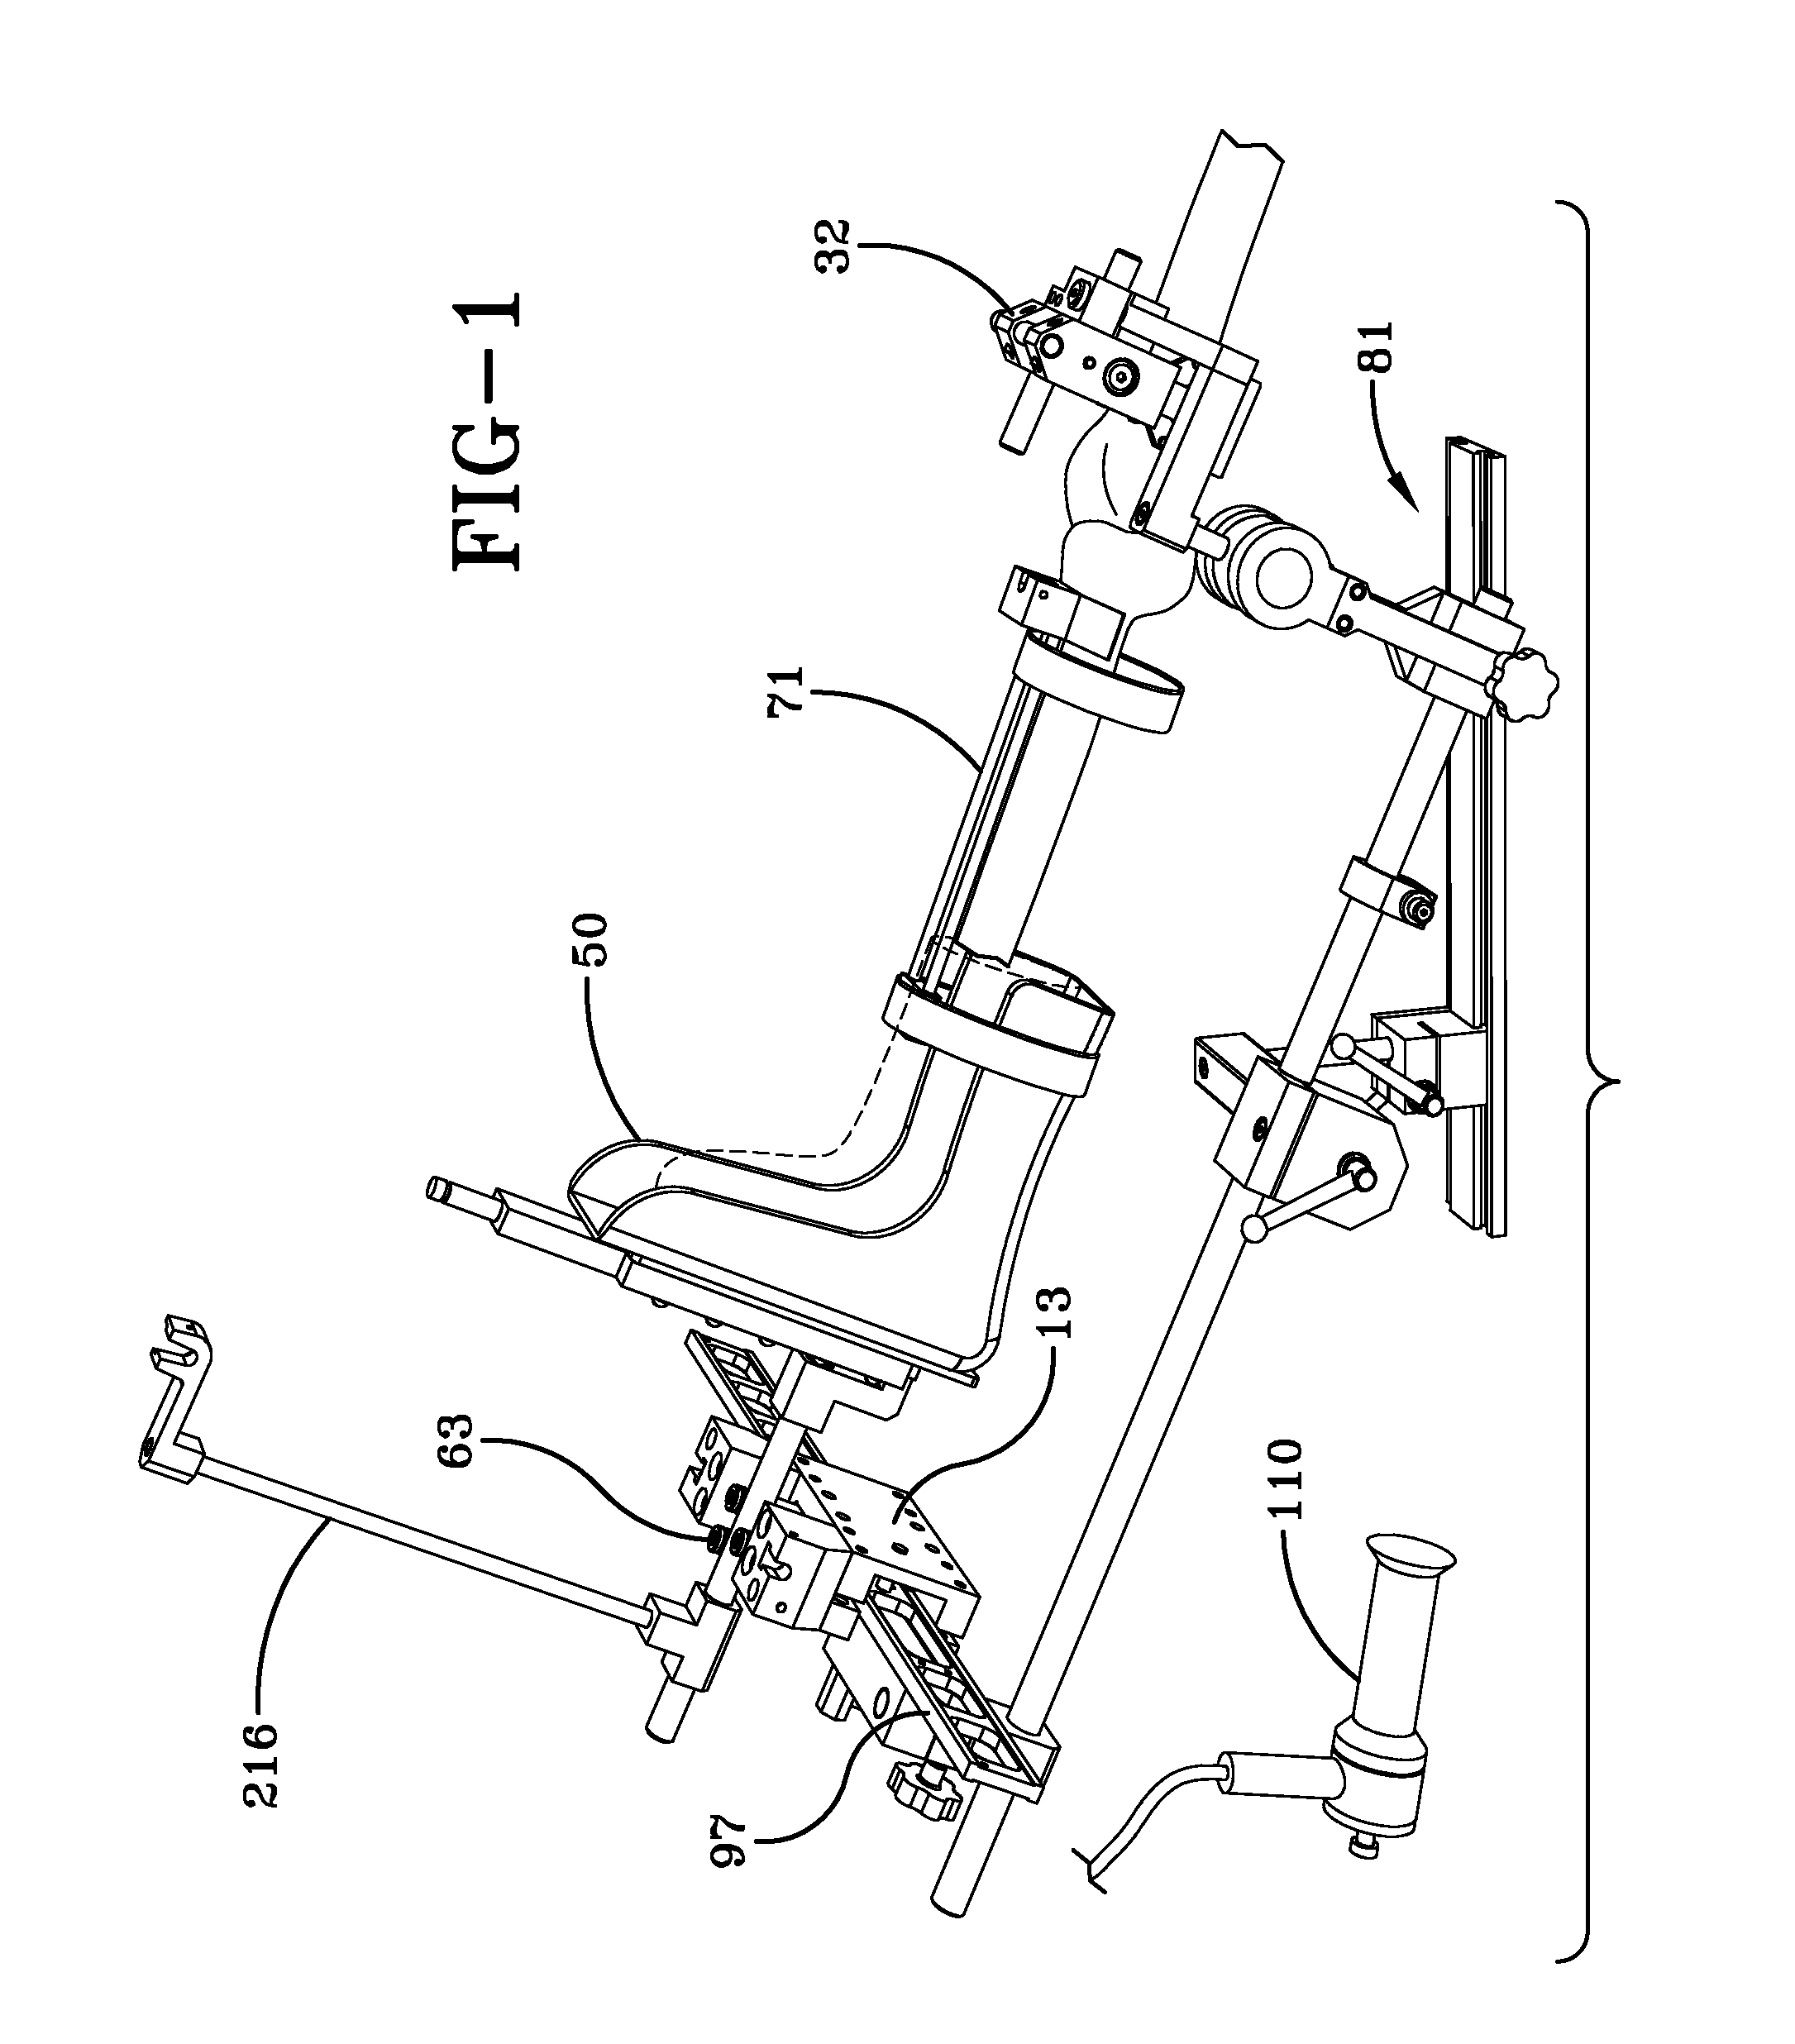 Joint stability arrangement and method